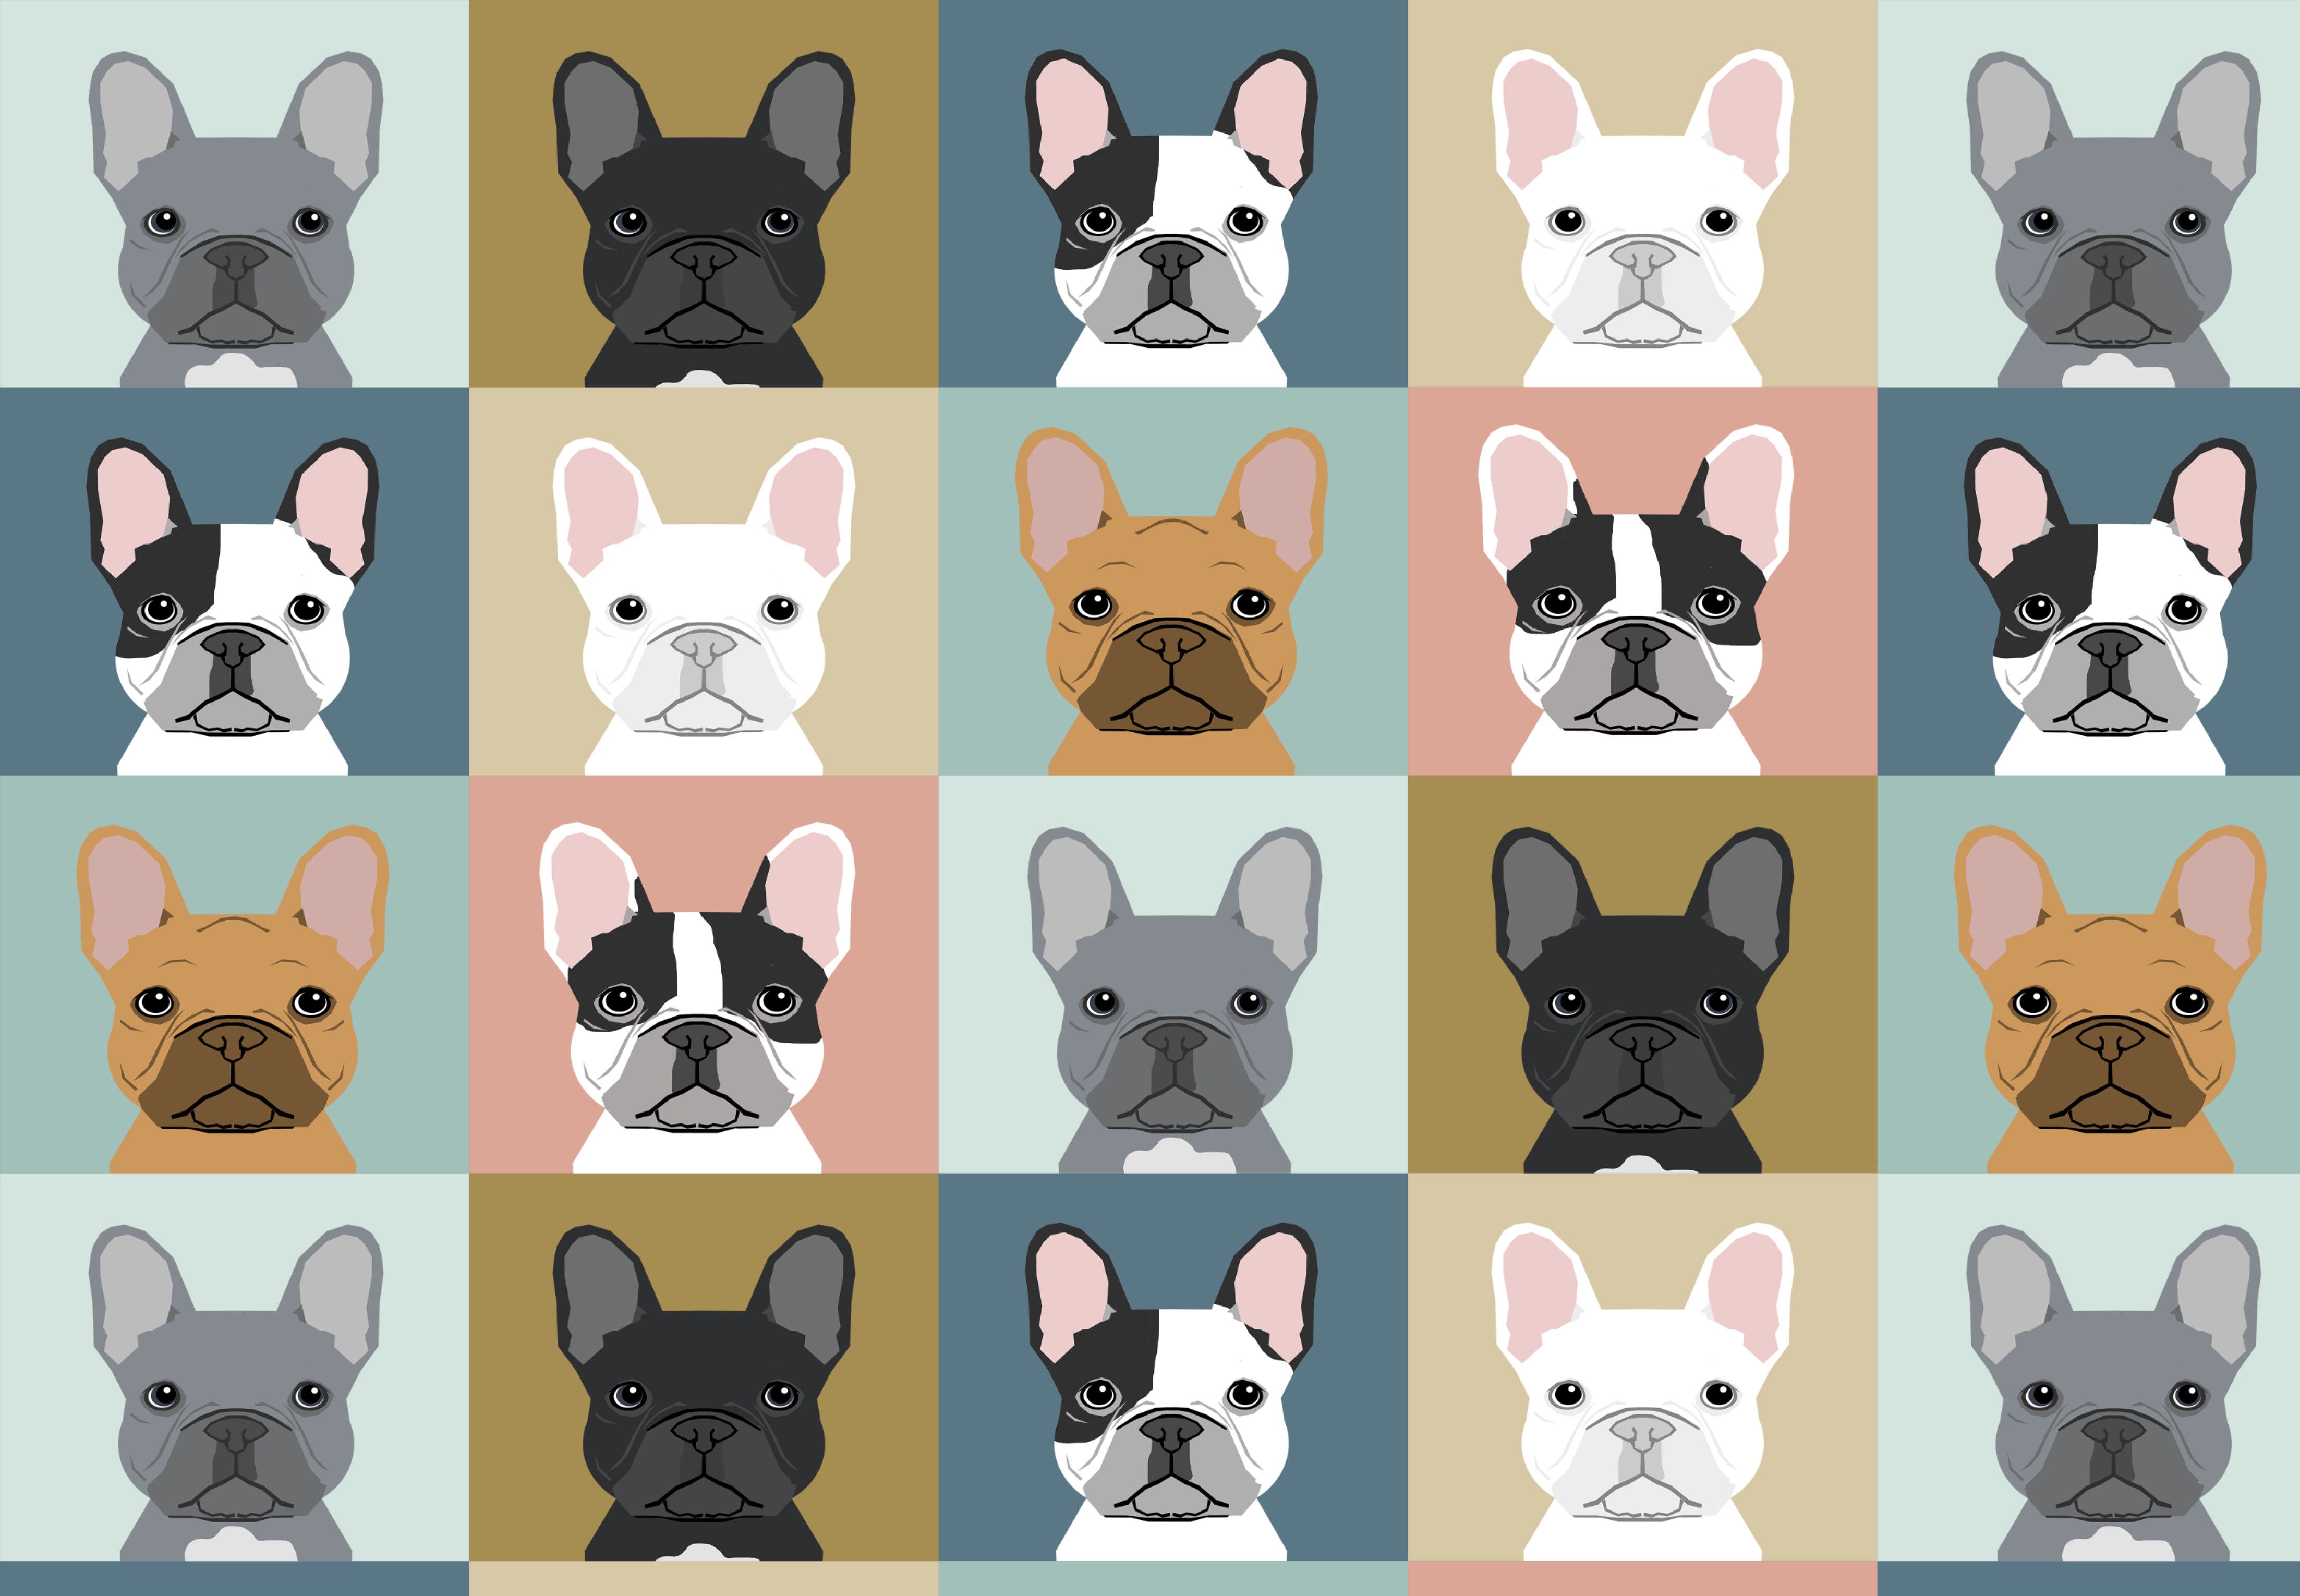 CASETiFY #animals #dogs #cute #art #lovely #wallpaper #ideas. Dog wallpaper, French bulldog wallpaper, Cute french bulldog